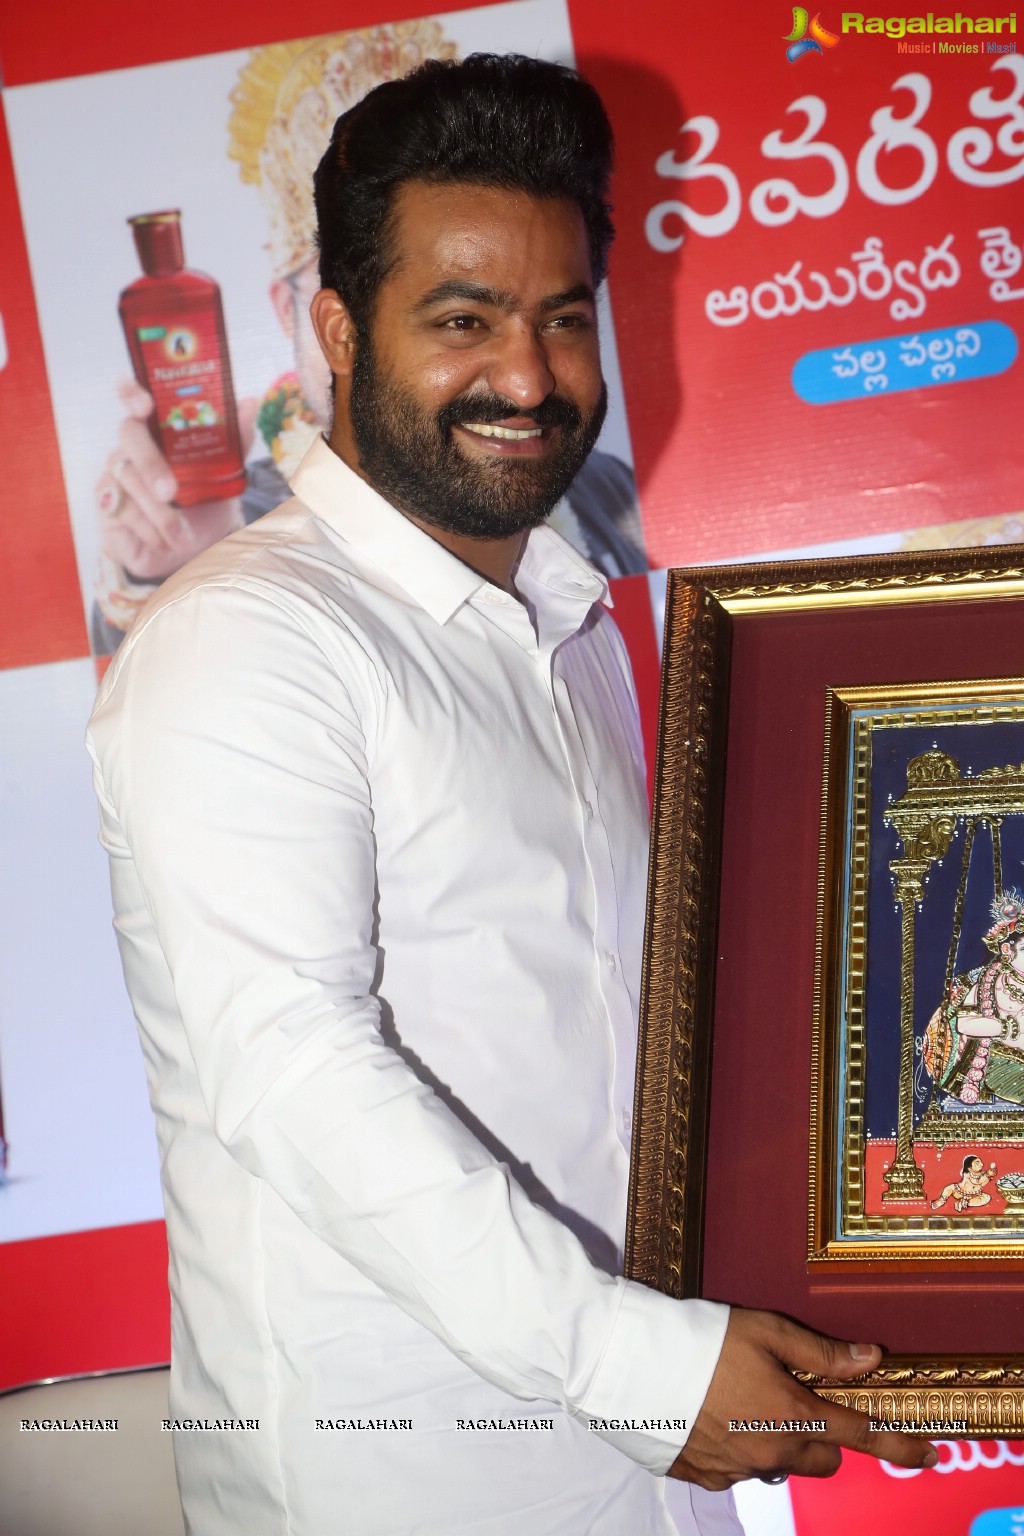 Emami Press Conference with NTR at The Park, Hyderabad